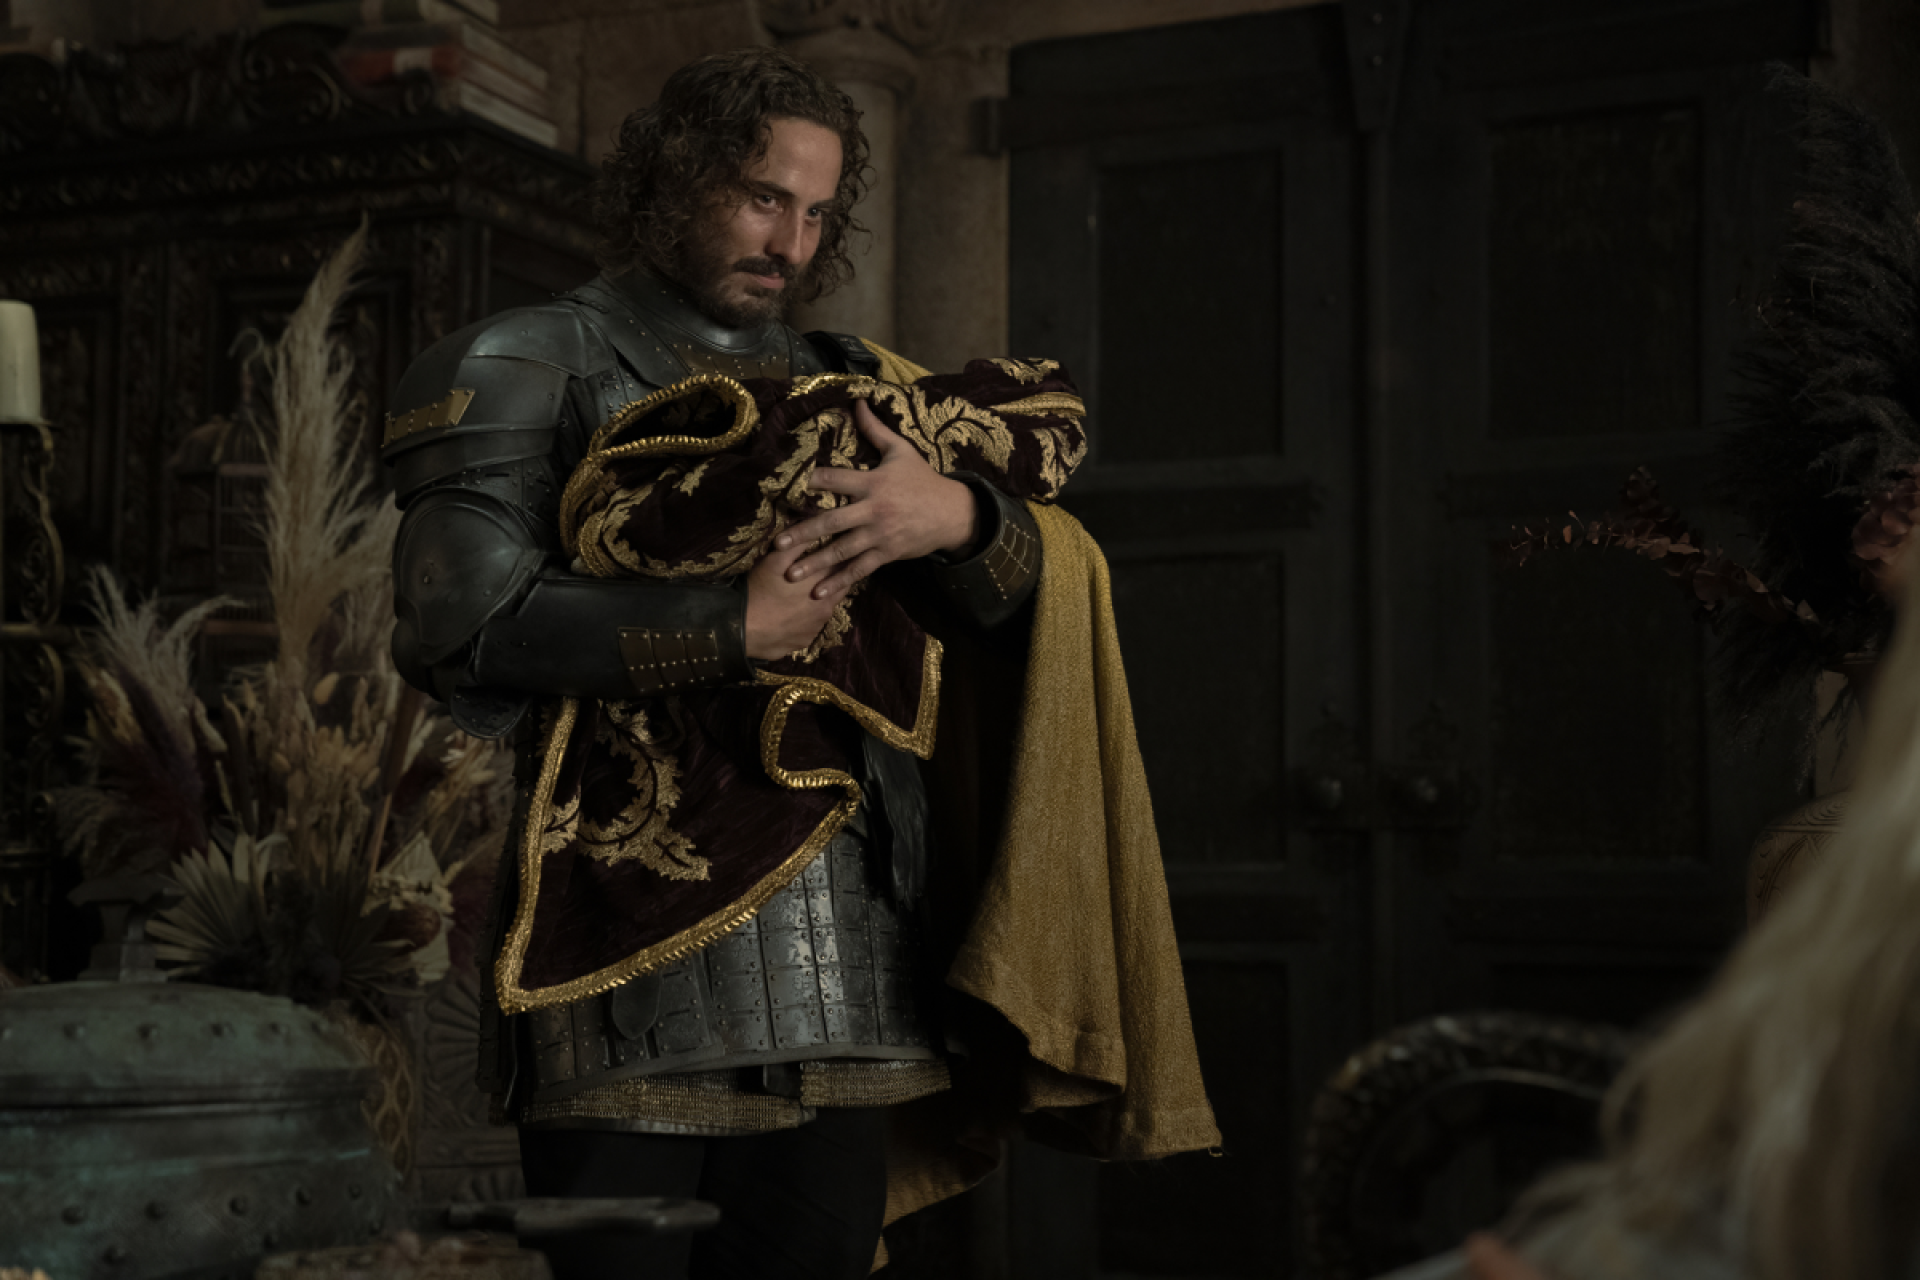 Sir Harwin Strong, played by Ryan Corr, holds the youngest of his sons with Princess Rhaenyra Targaryen in House of the Dragon